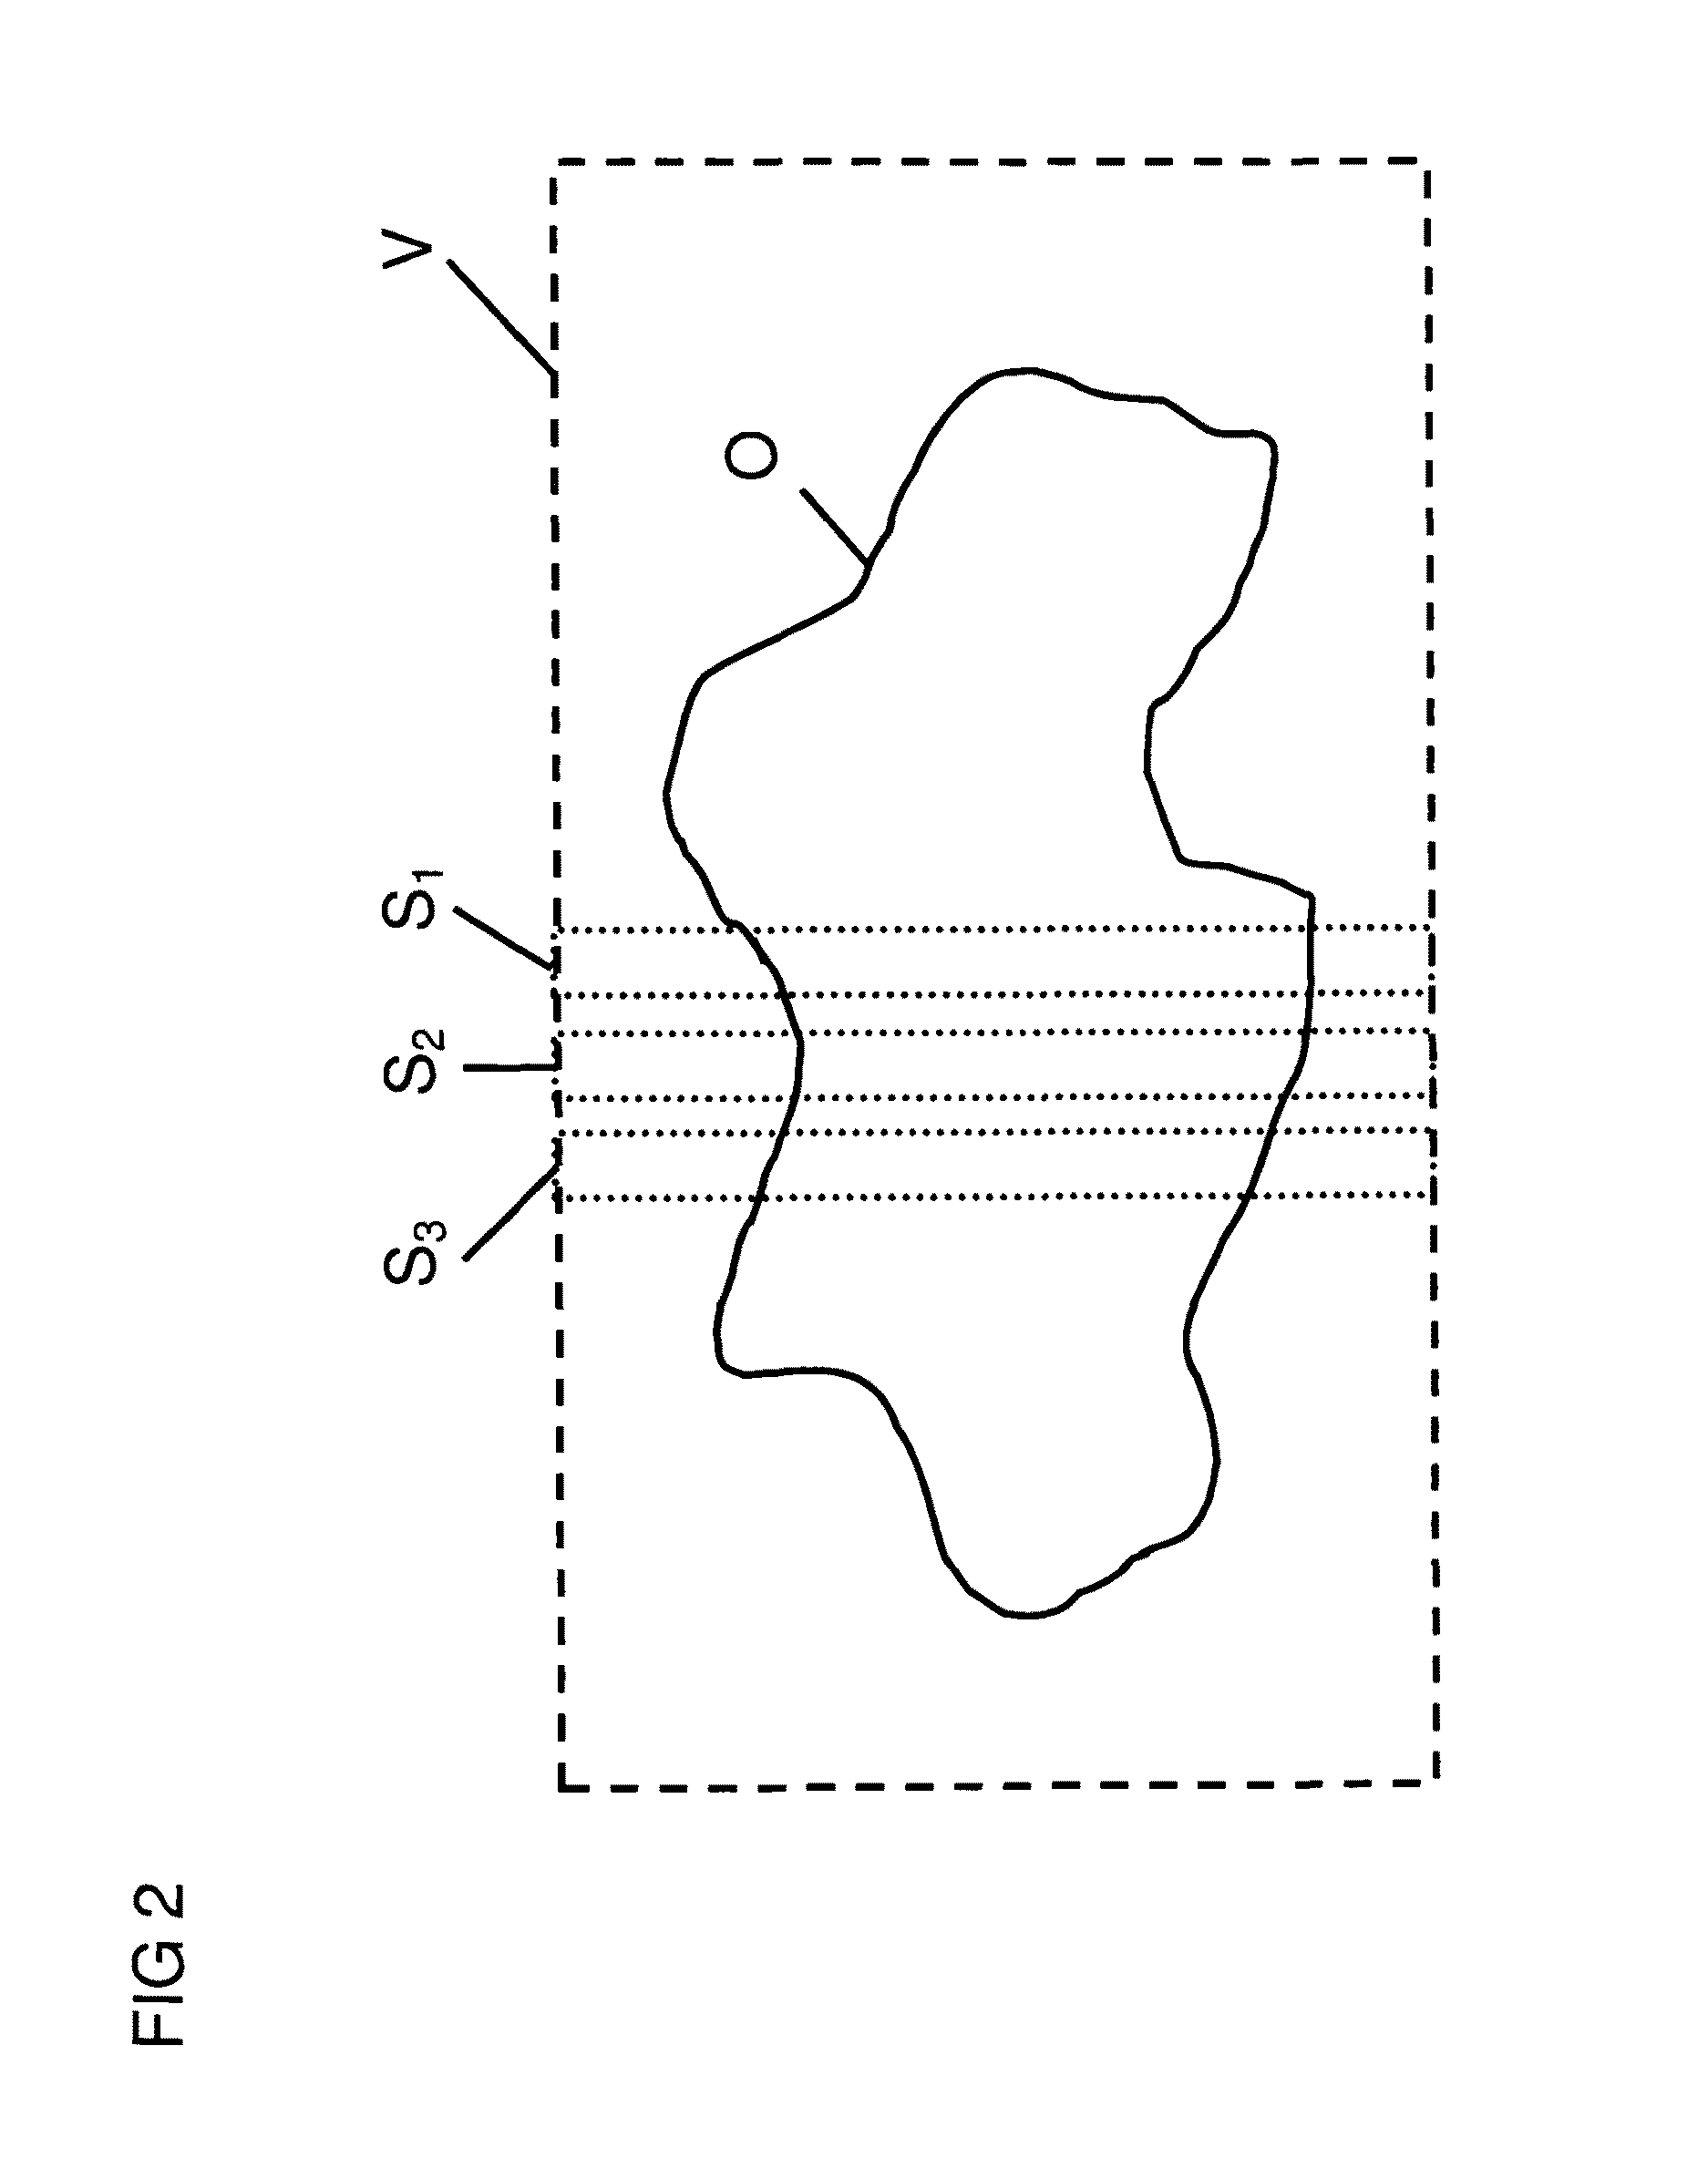 Method for obtaining amplitude and phase profiles of RF pulses for spatially selective excitation